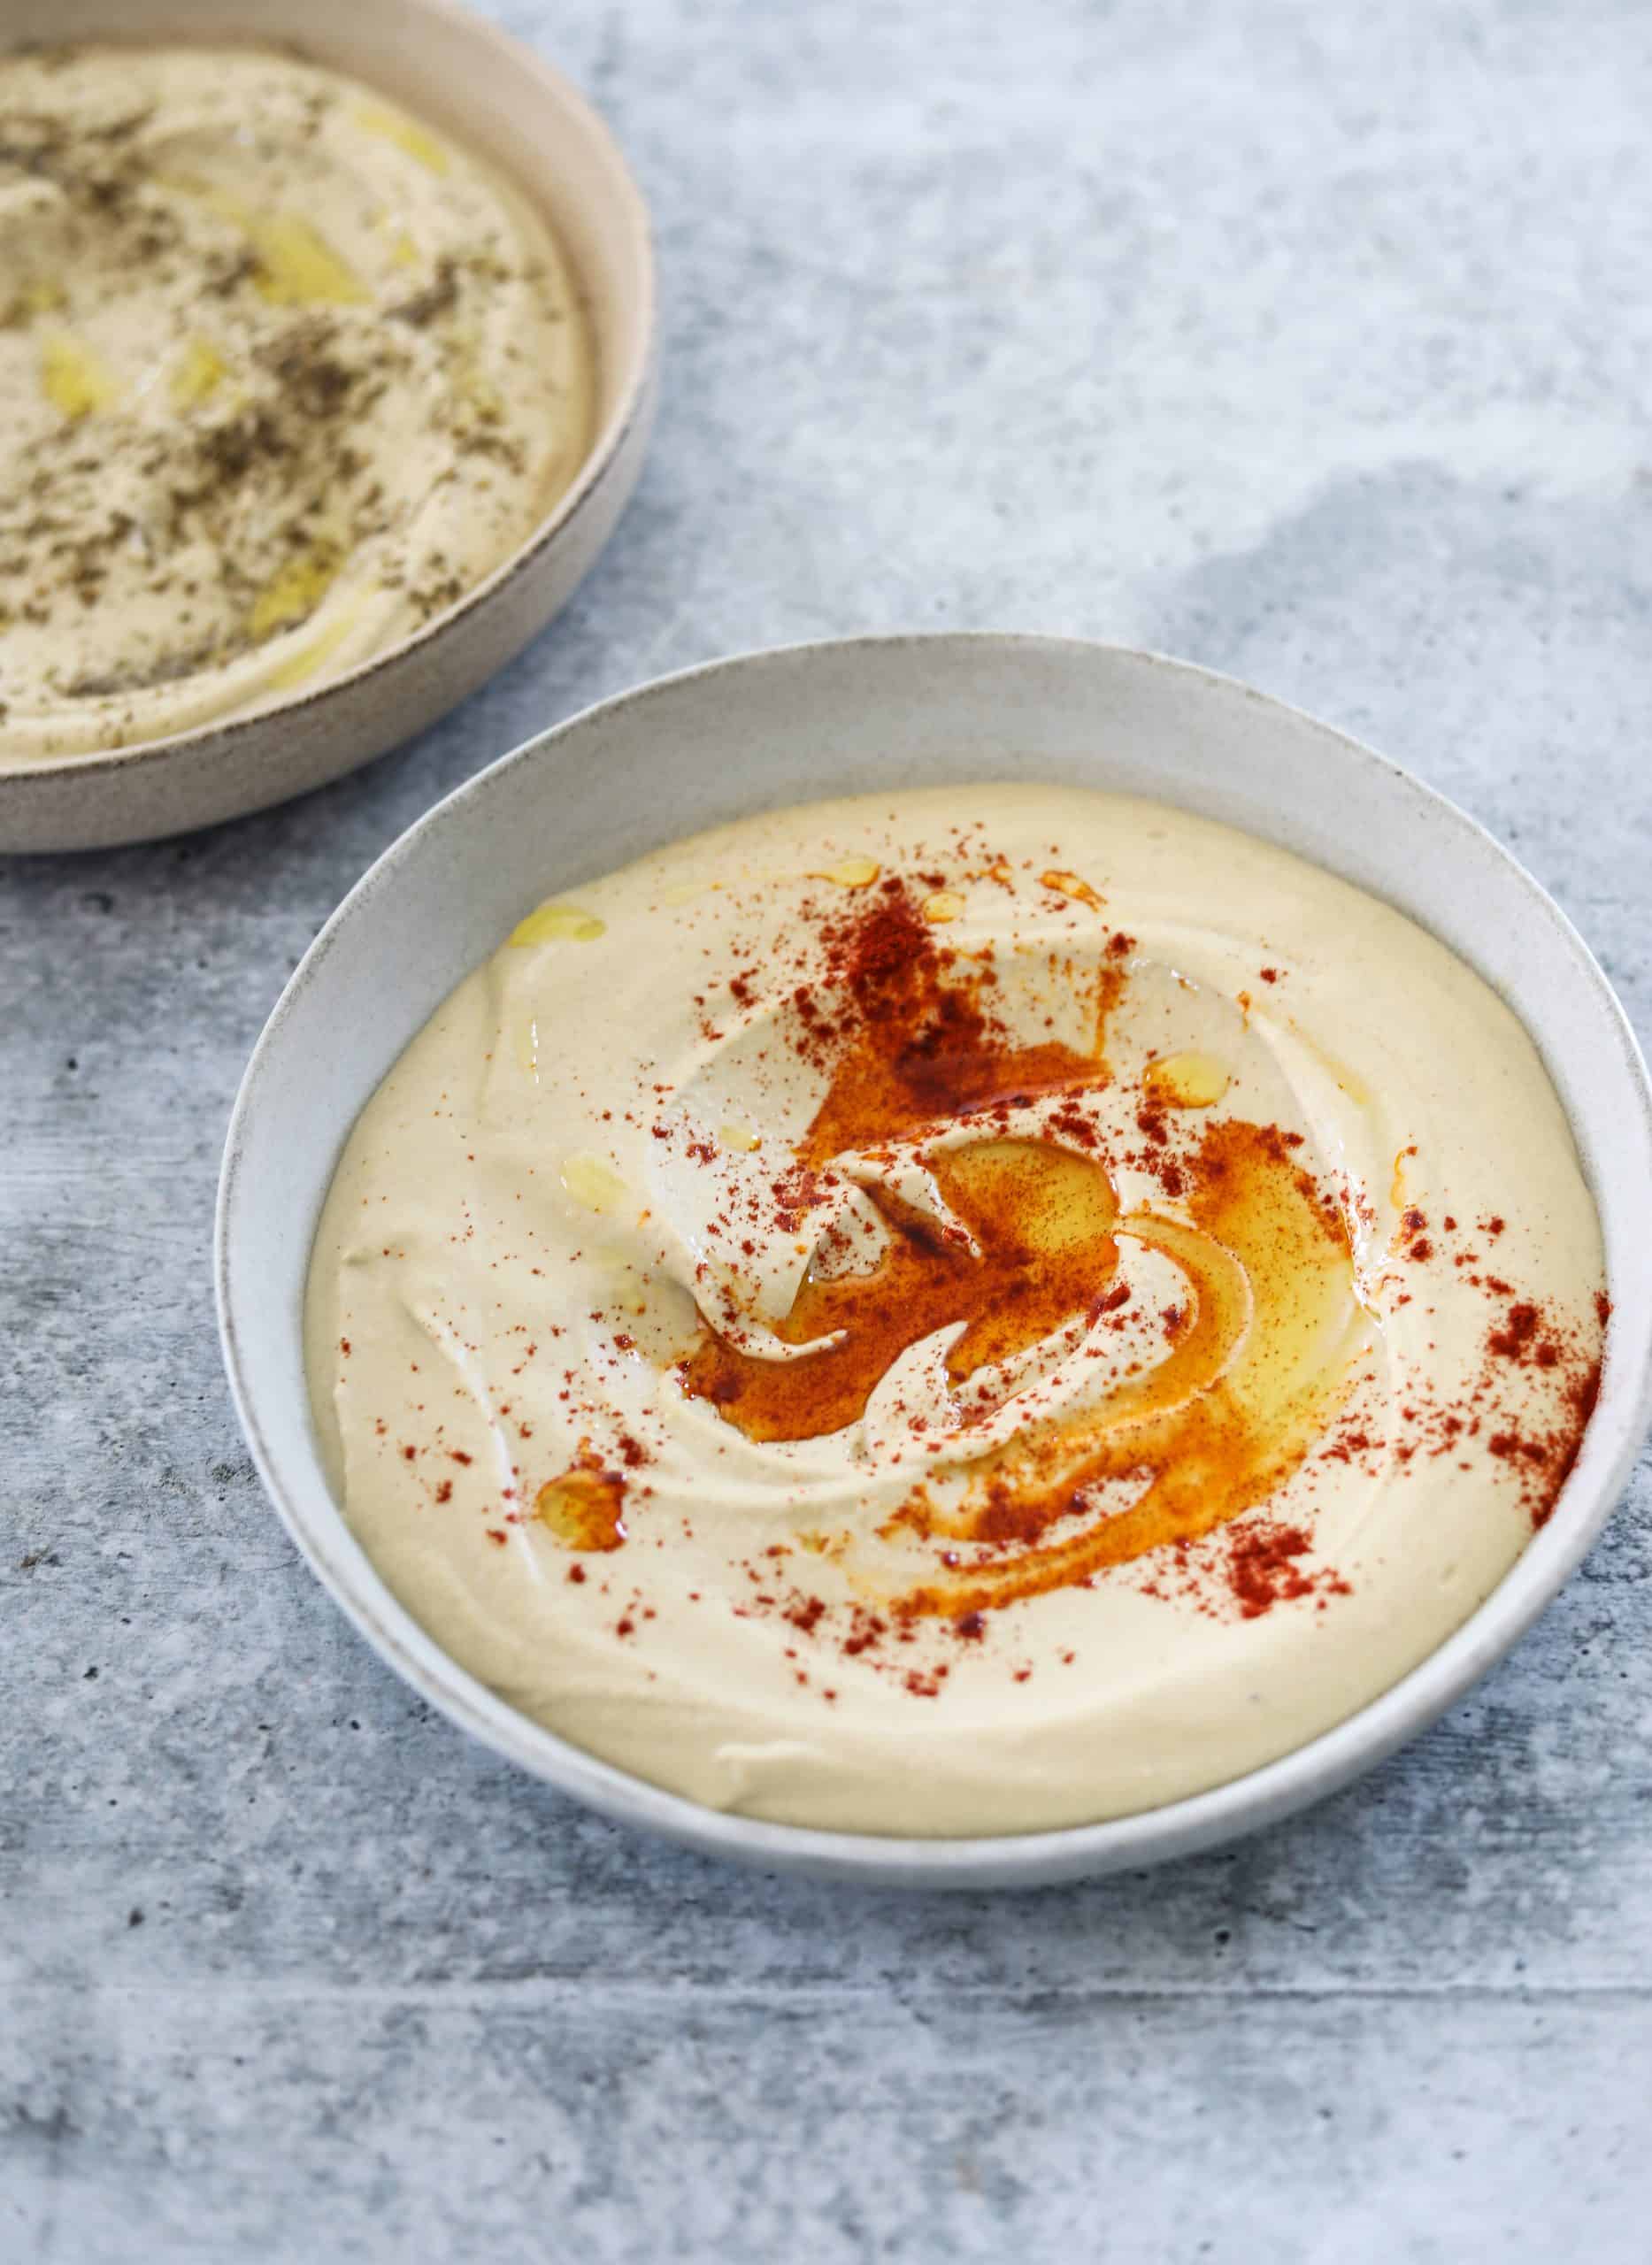 two bowls of Smooth and Creamy Homemade Hummus topped with olive oil and smoked paprika